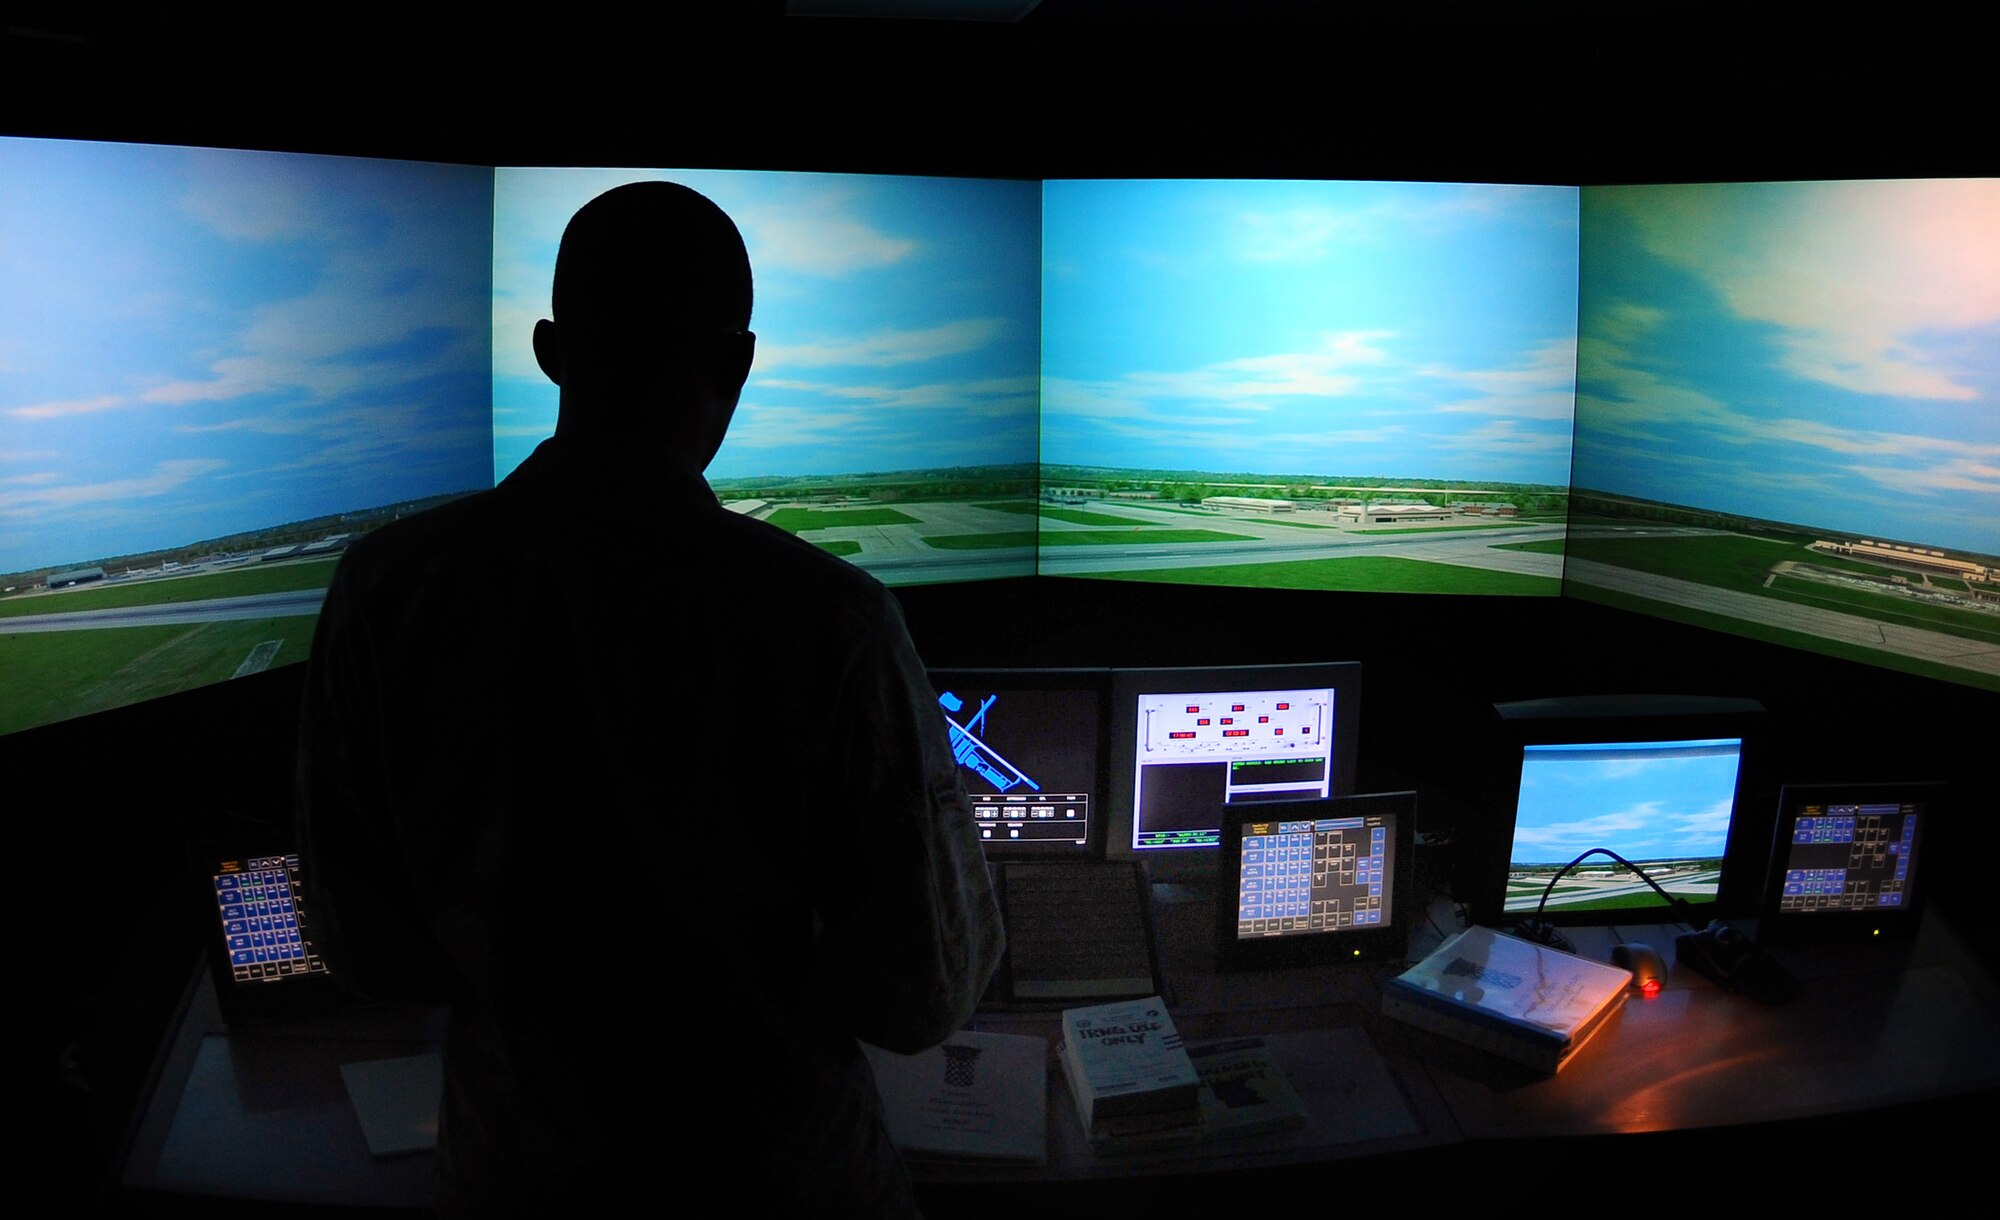 OFFUTT AIR FORCE BASE, Neb. - Airman 1st Class Derrick Miller, an air traffic controller apprentice assigned to the 55th Operations Support Squadron, spends time in an air traffic control simulator with a 180 degree monitor with a detailed view of Offutt as part of routine training here, Feb. 24. U.S. Air Force Photo by Josh Plueger (Released)
